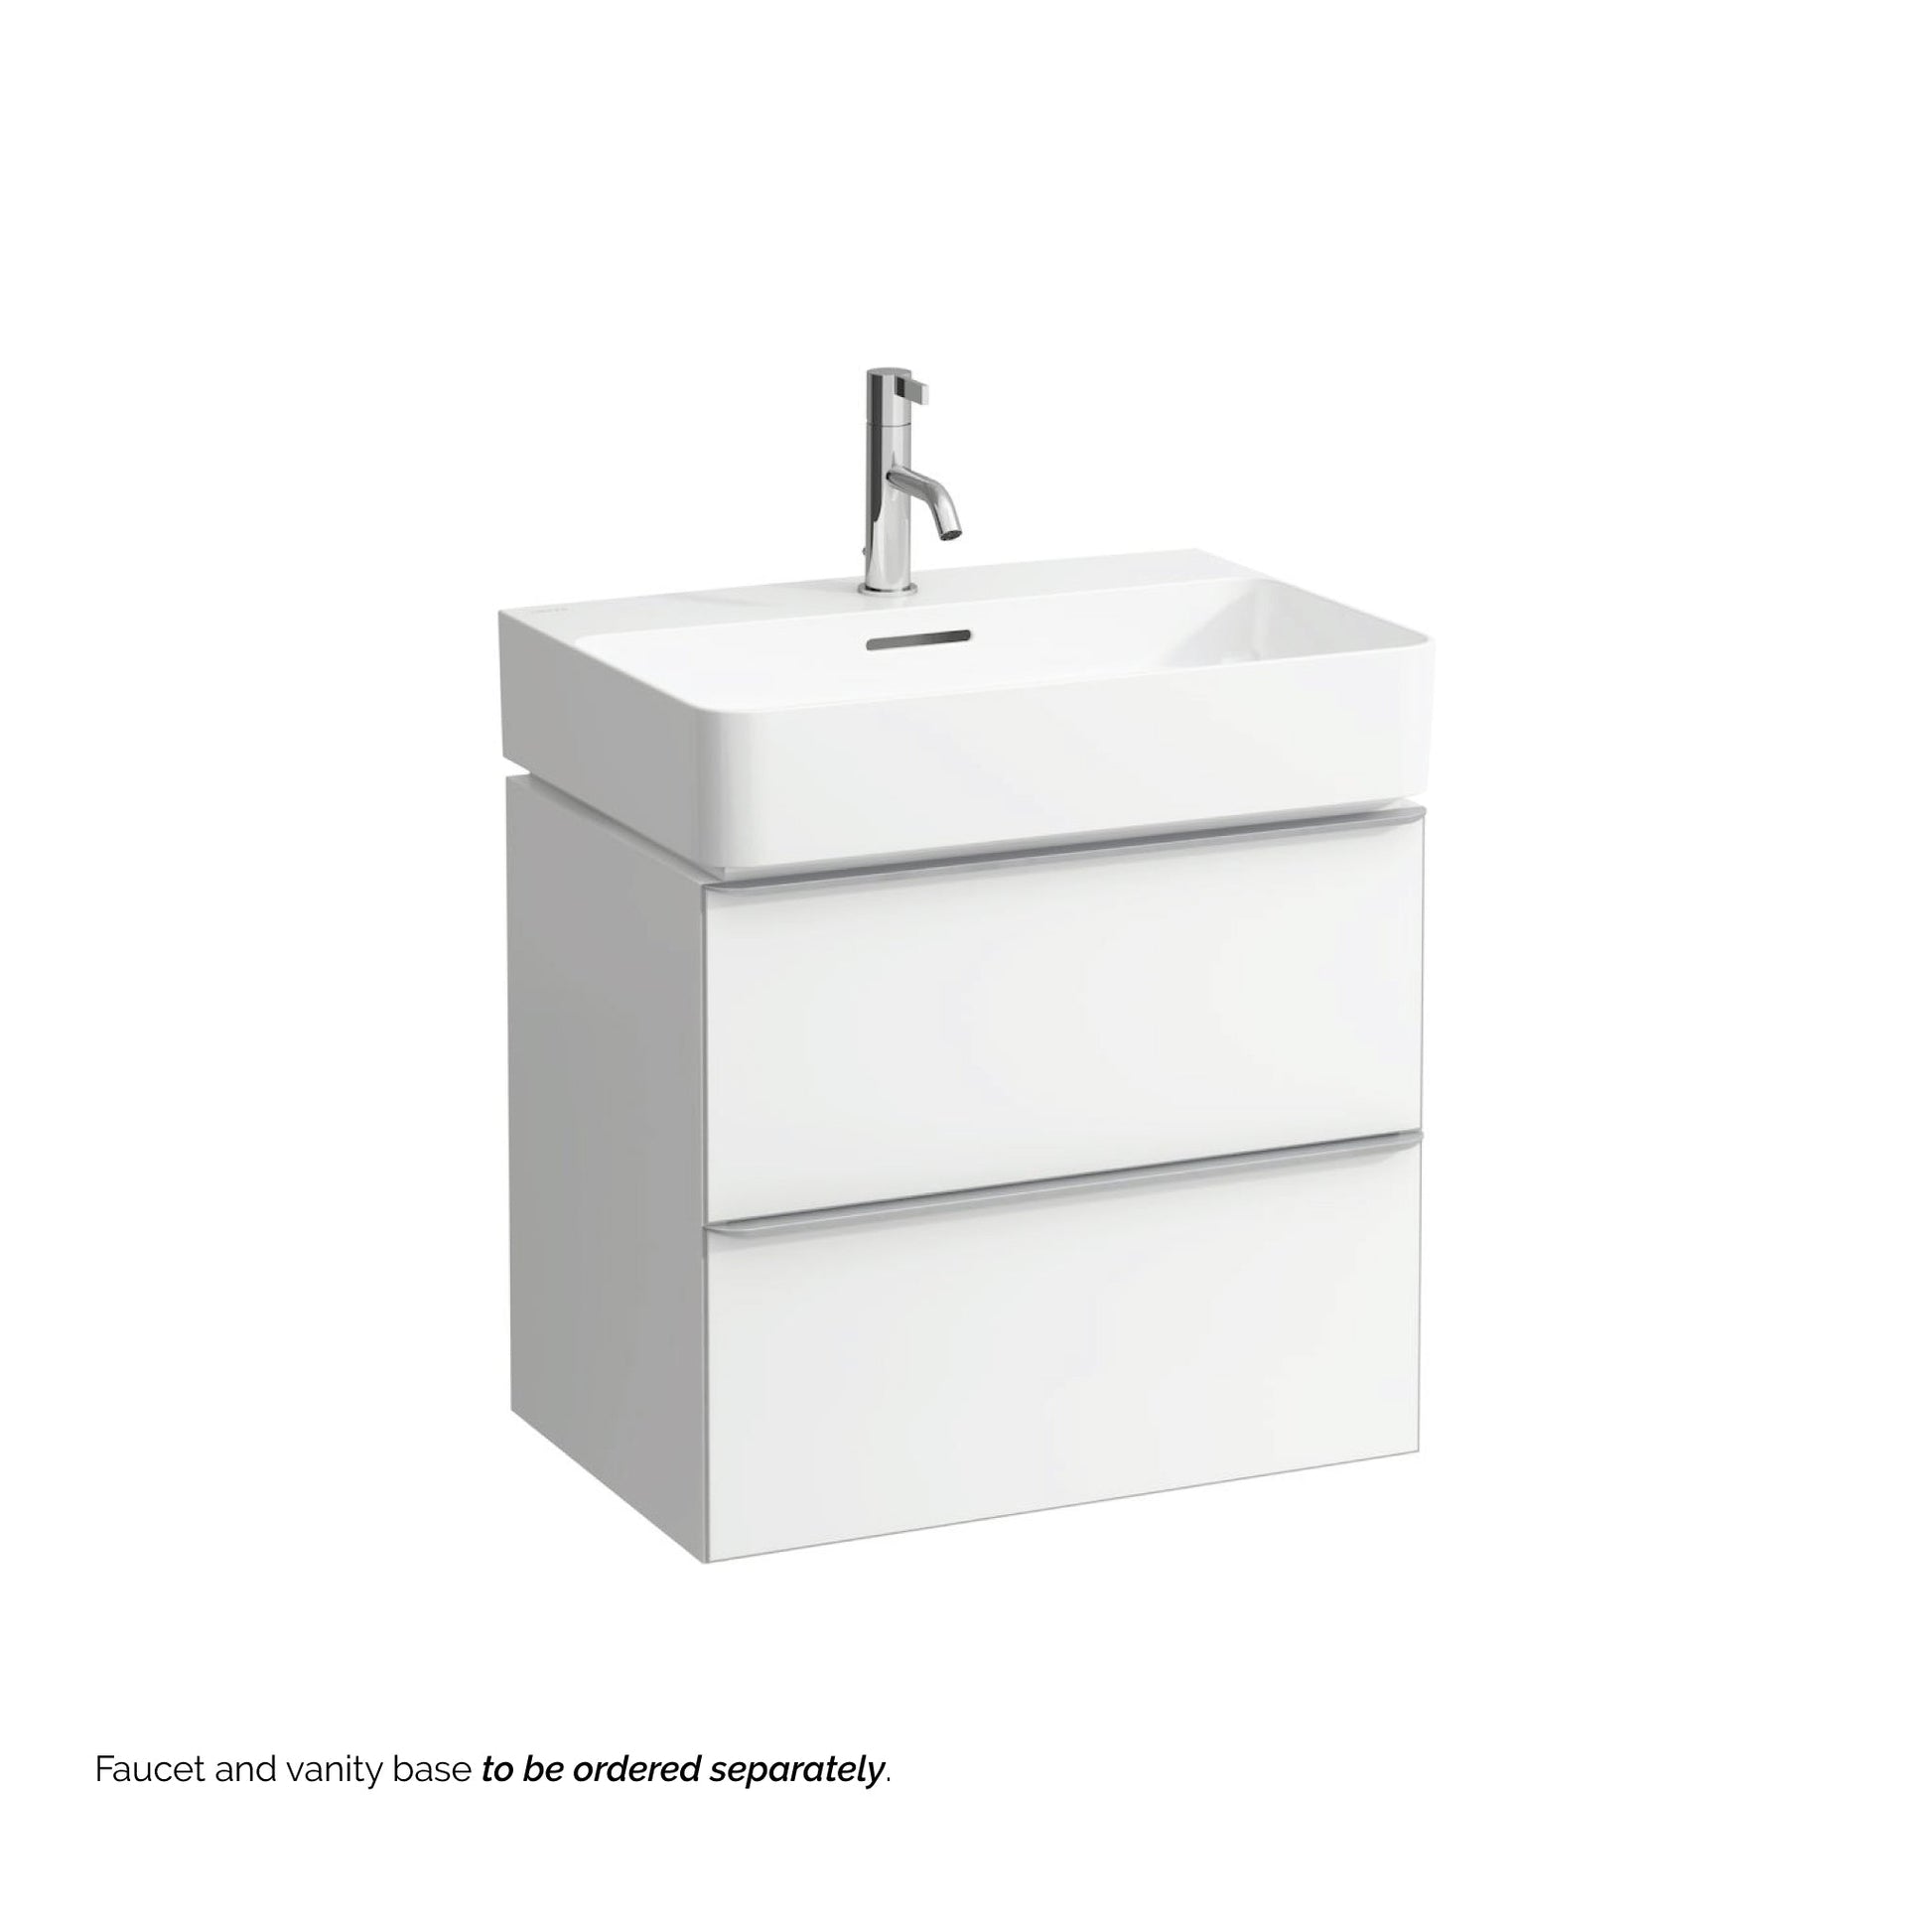 Laufen Val 24" x 17" Matte White Ceramic Wall-Mounted Bathroom Sink With Faucet Hole